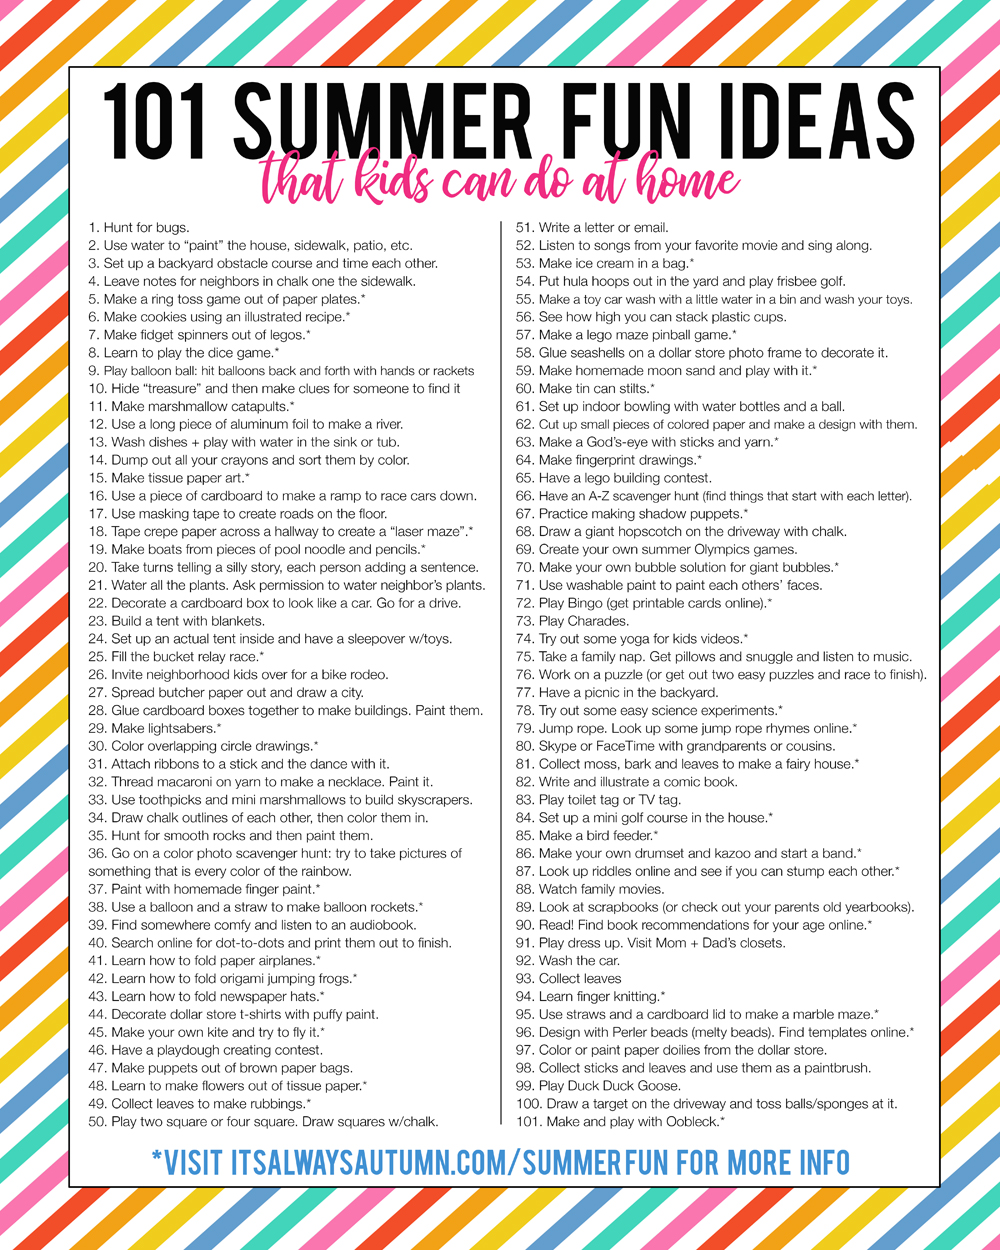 101 summer fun ideas for kids! These are easy, cheap, summer games, crafts and activities that kids can do at home. Good-bye summer boredom!